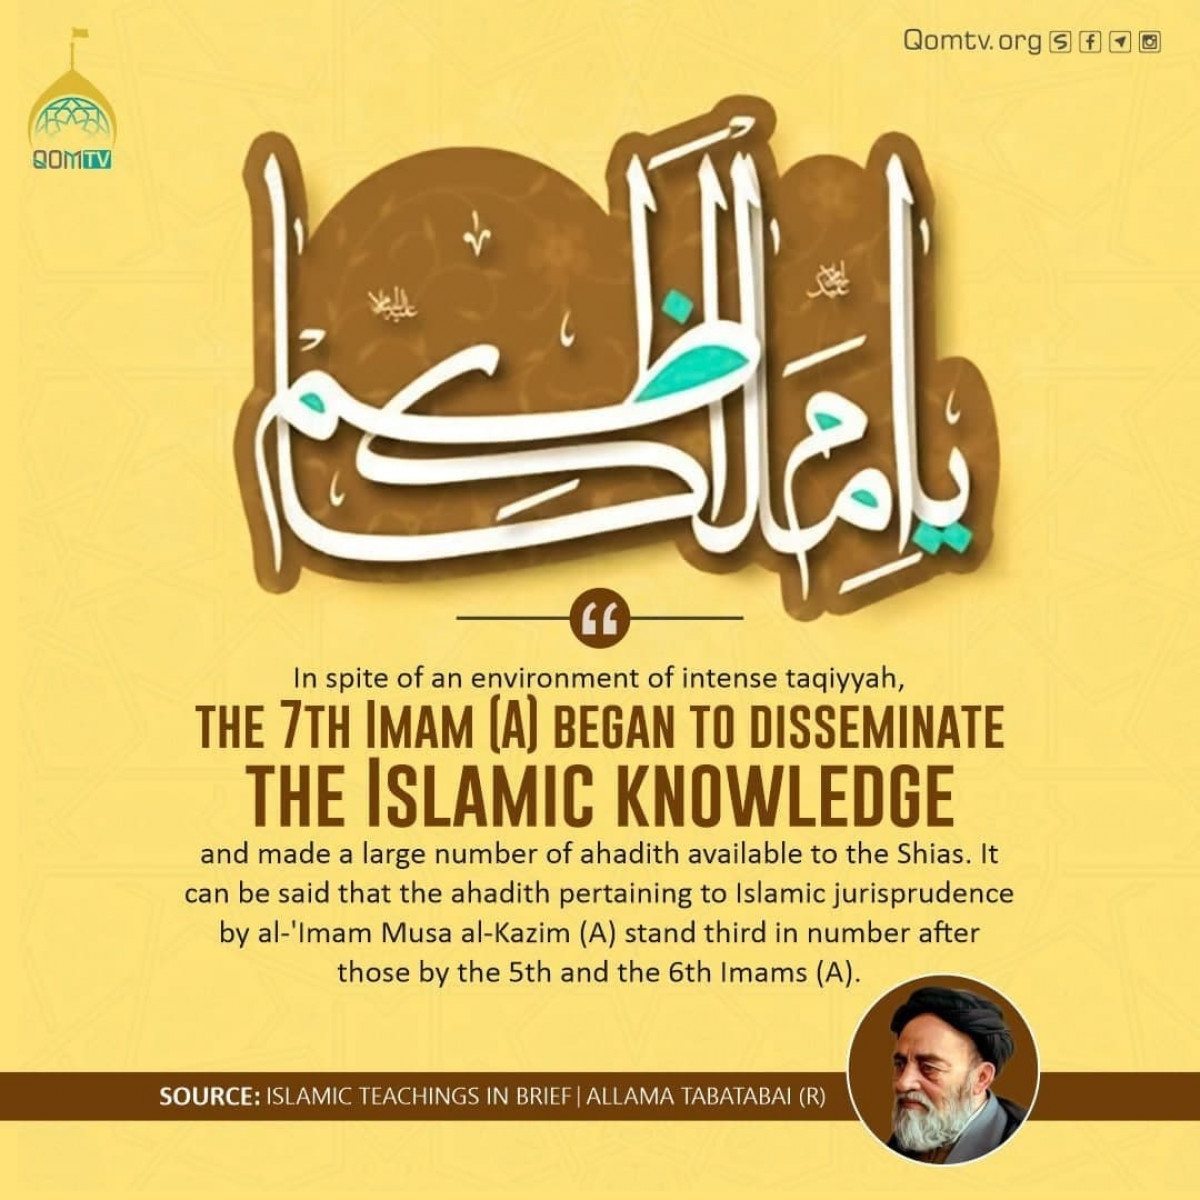 In spite of an environment of intense taqiyyah, the 7th Imam (A) began to disseminate the Islamic knowledge